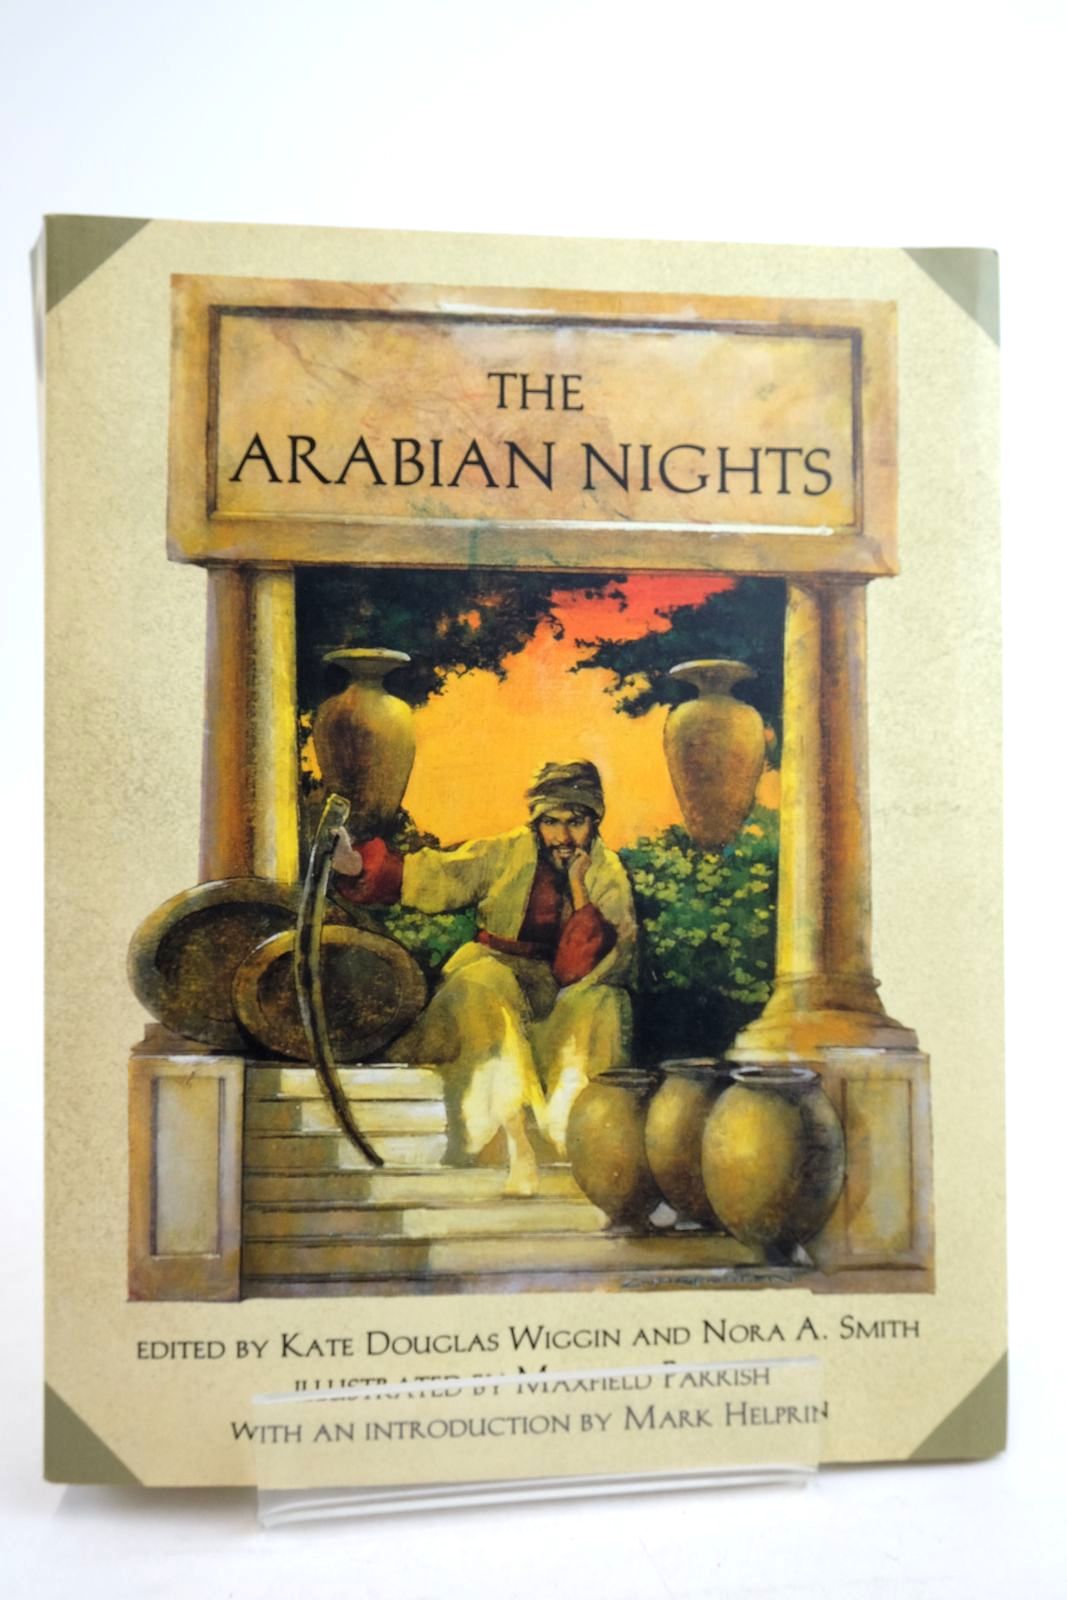 Photo of THE ARABIAN NIGHTS THEIR BEST-KNOWN TALES written by Wiggin, Kate Douglas Smith, Nora A. Helprin, Mark illustrated by Parrish, Maxfield published by Quality Paperback Book Club (STOCK CODE: 2134587)  for sale by Stella & Rose's Books